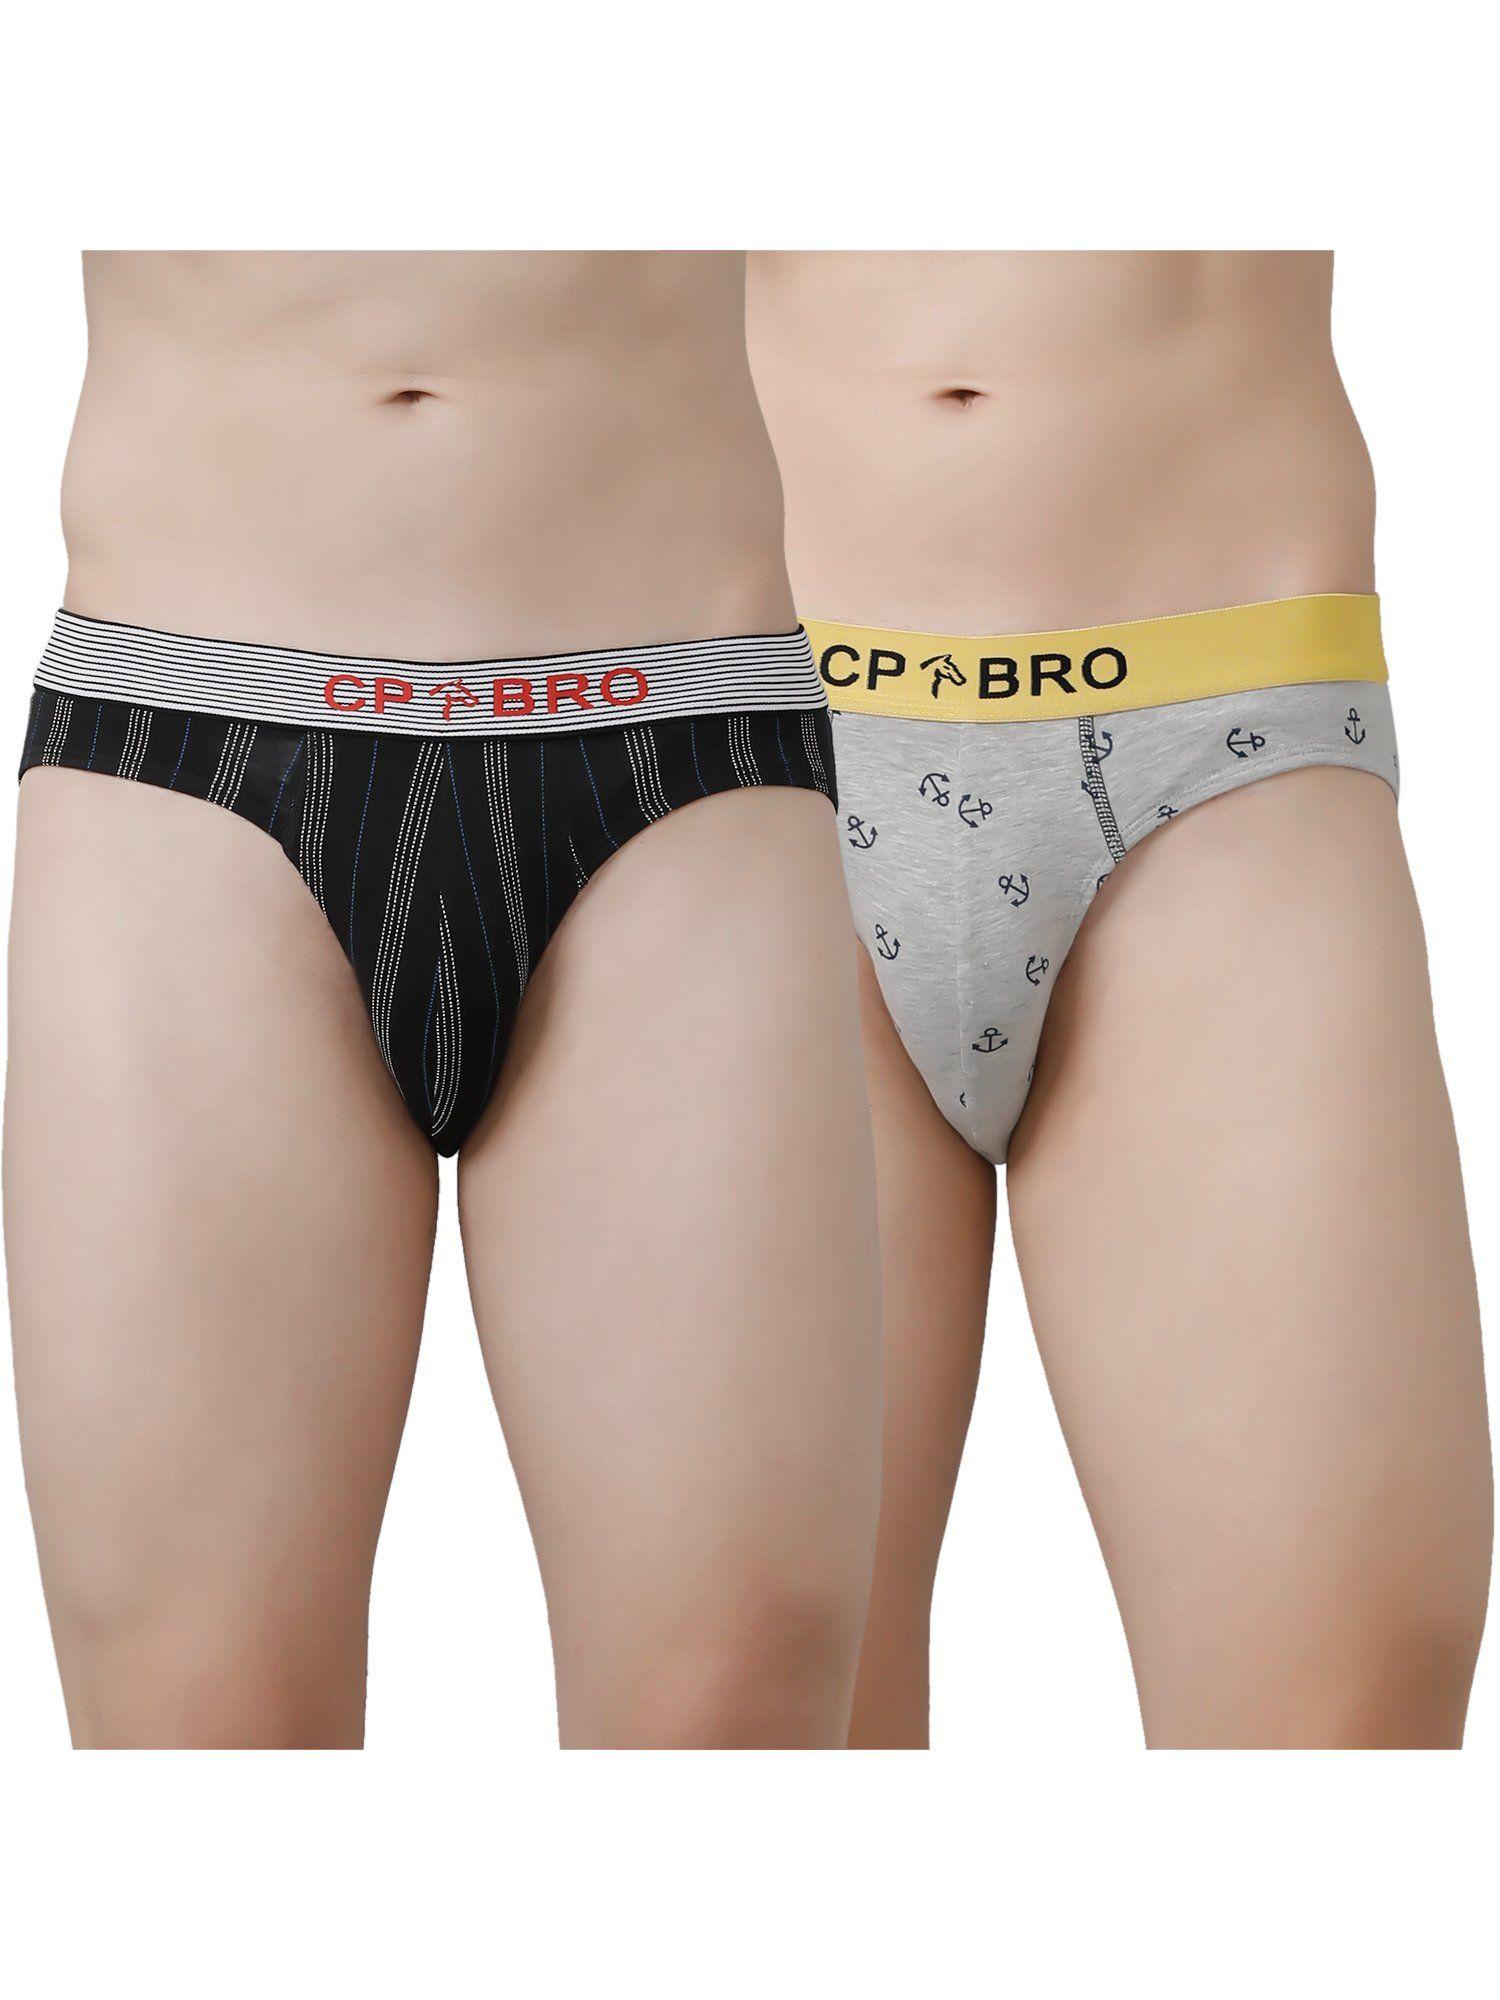 printed briefs with exposed waistband value - black stripe & grey anchor (pack of 2)